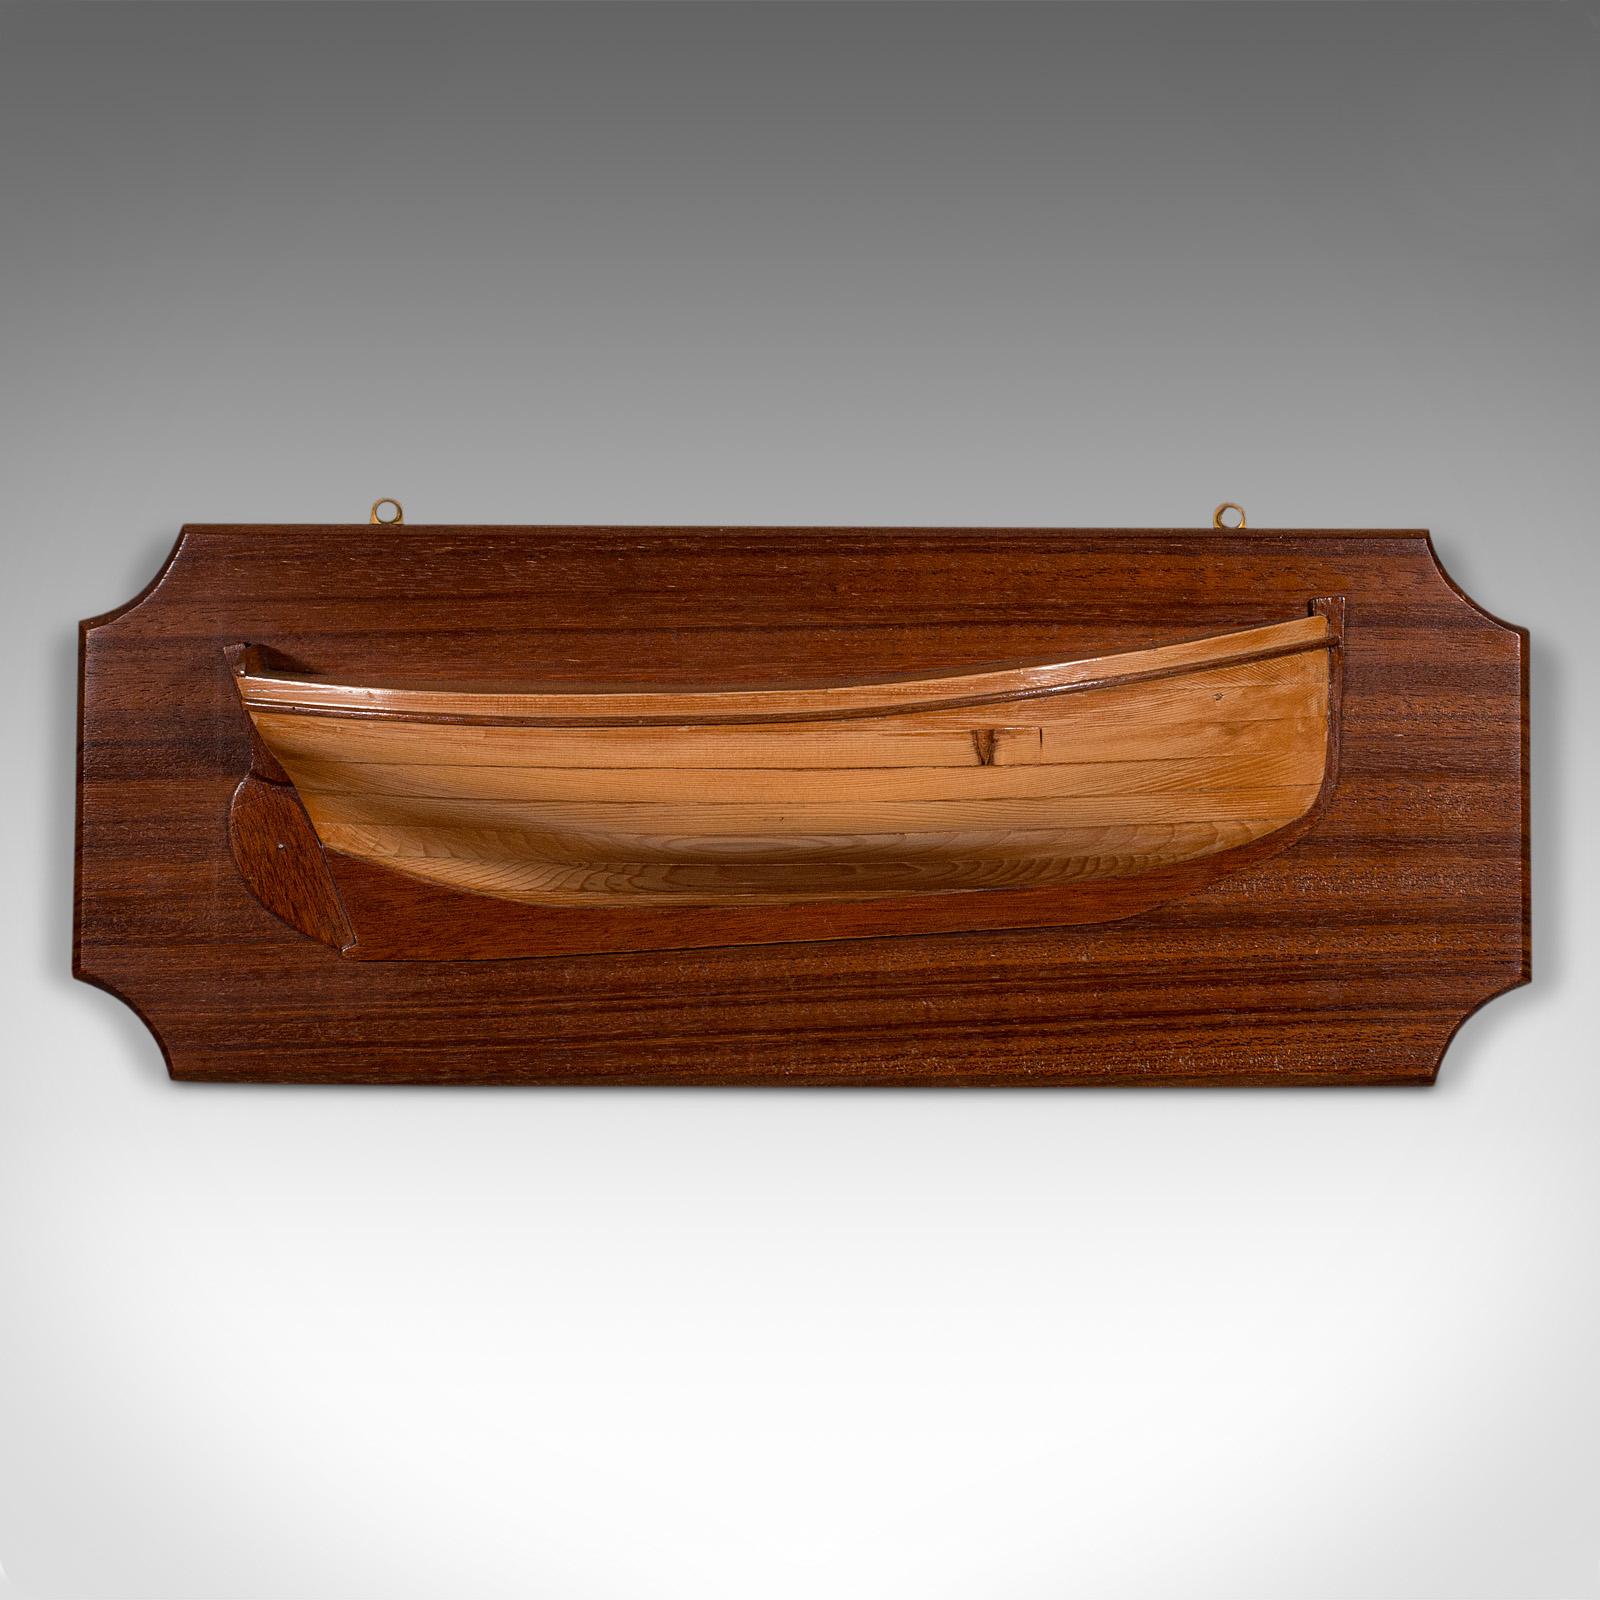 This is an antique boat's half hull plaque. An English, mahogany and pitch pine decorative maritime model, dating to the Edwardian period, circa 1910.

Graced with beautiful figuring and craftsmanship
Displays a desirable aged patina and in good